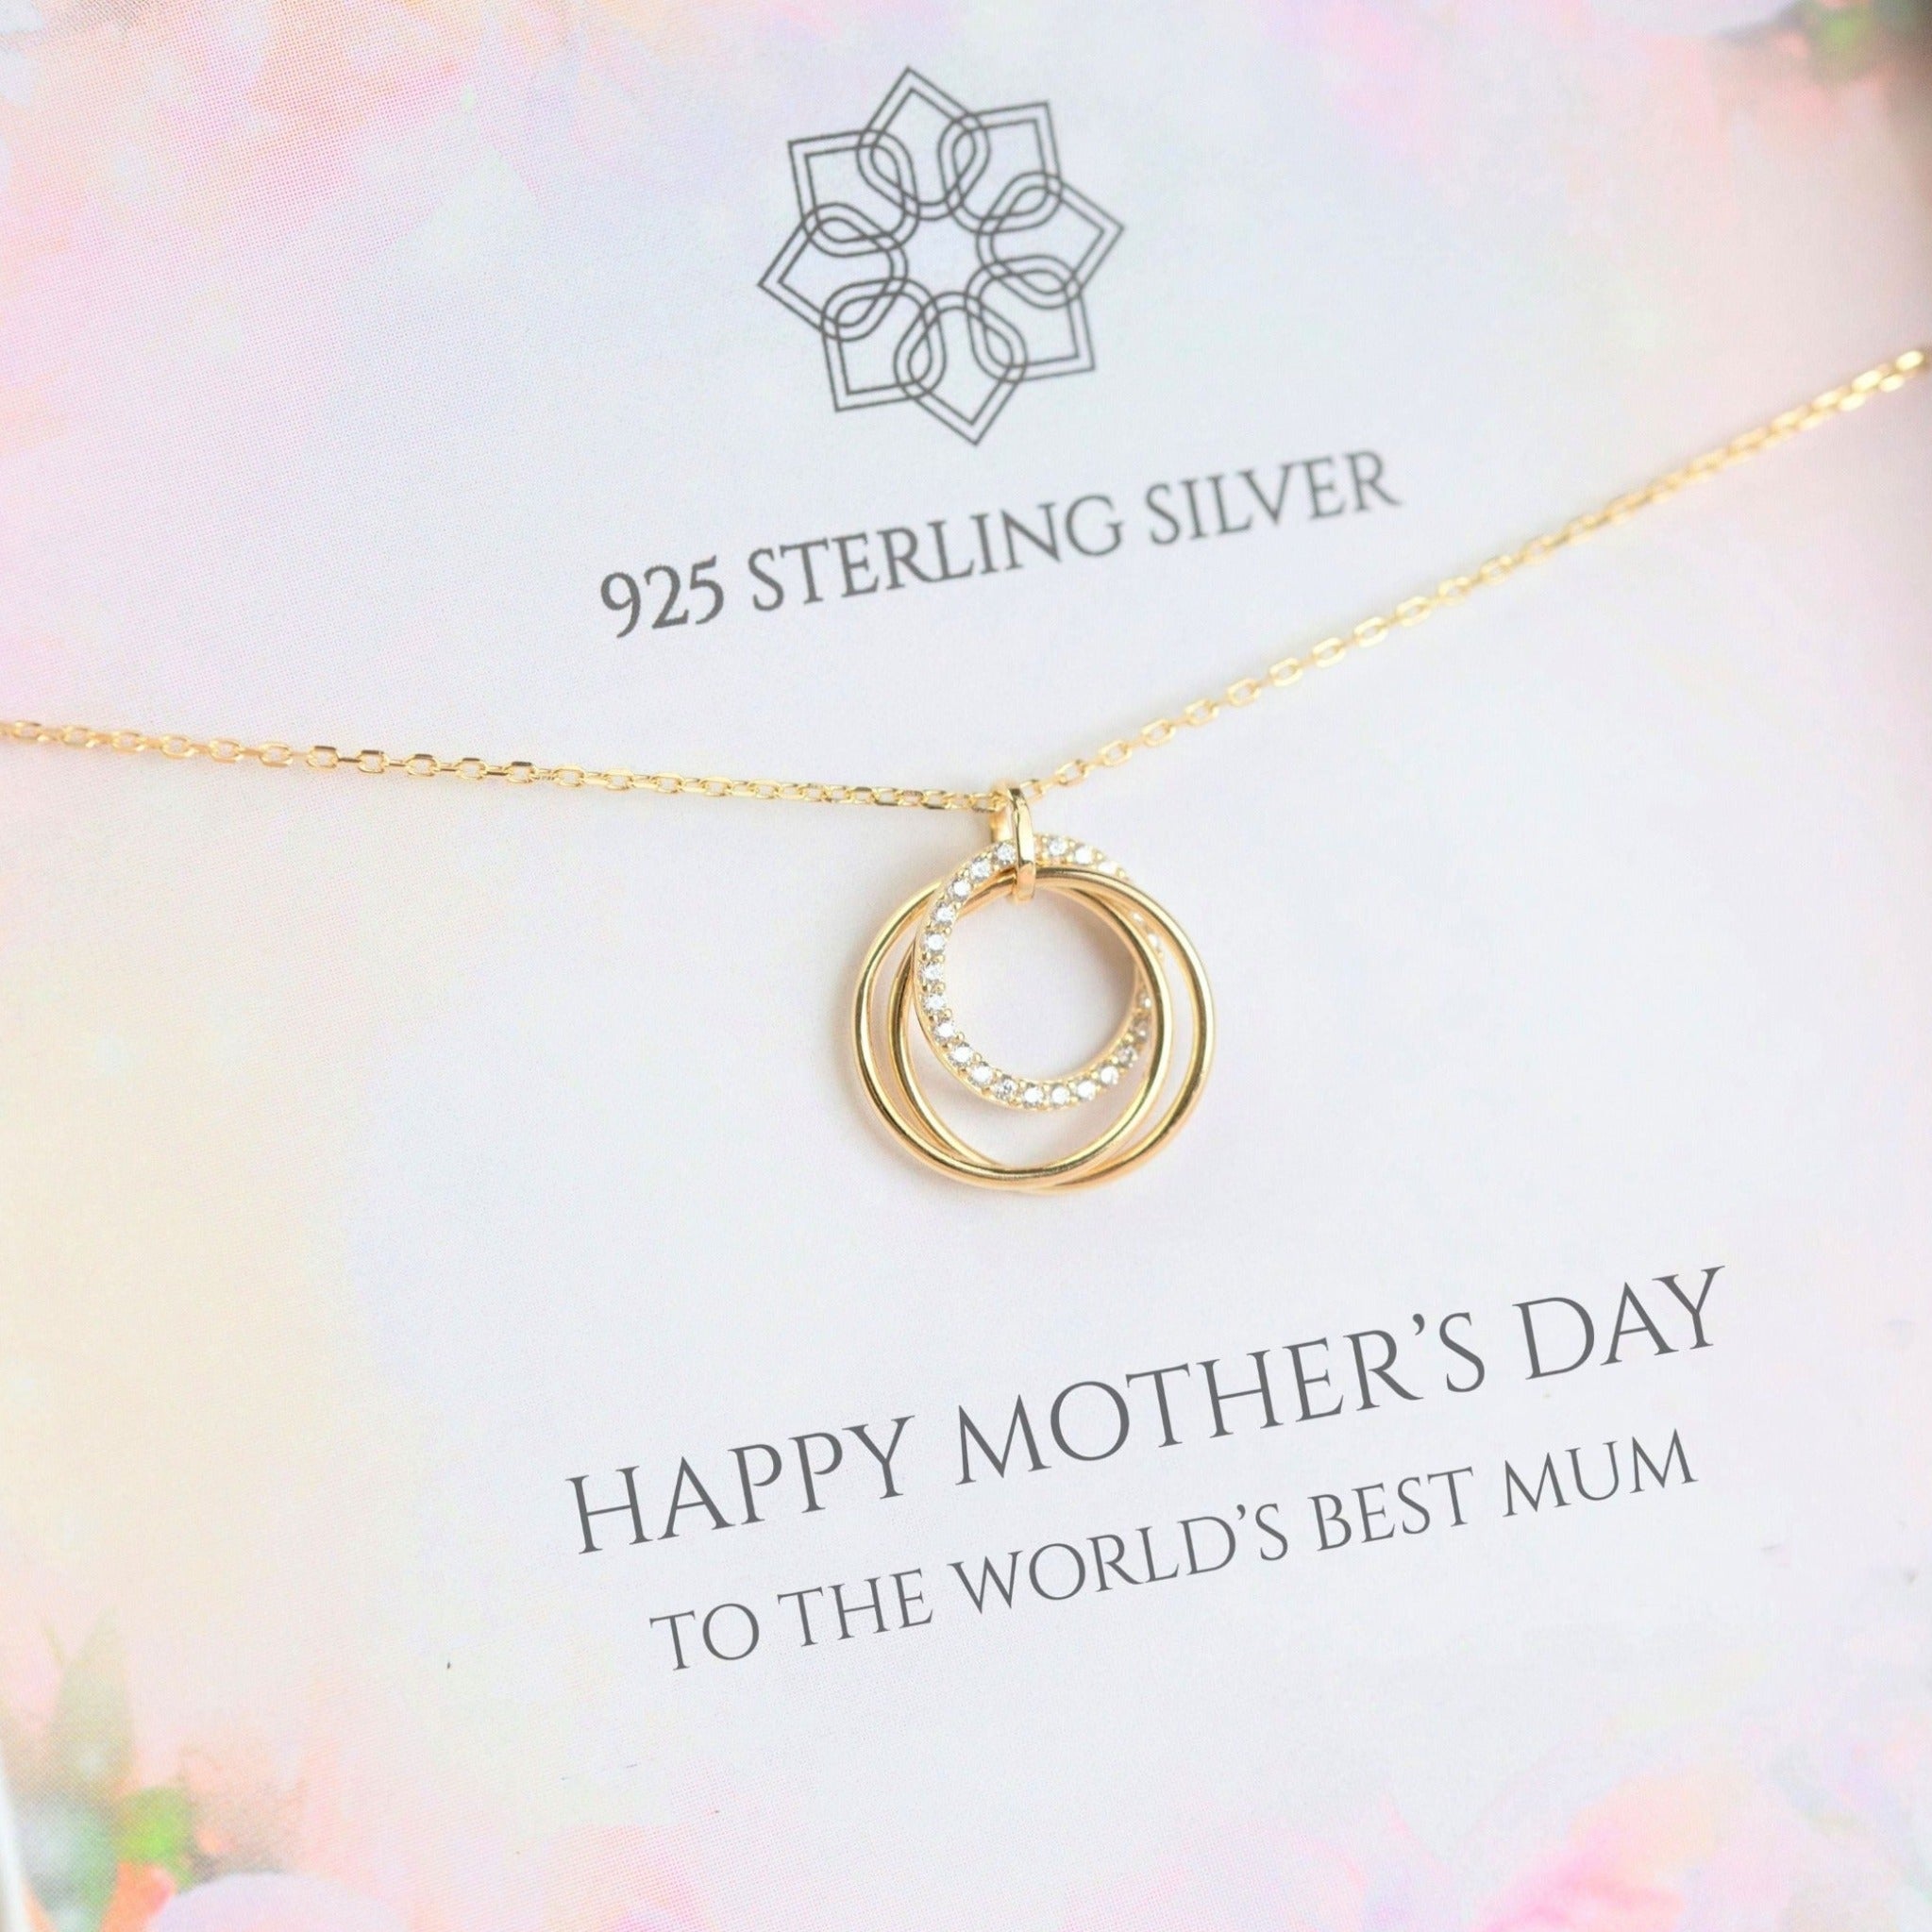 World's Best Mum Mother's Day Necklace